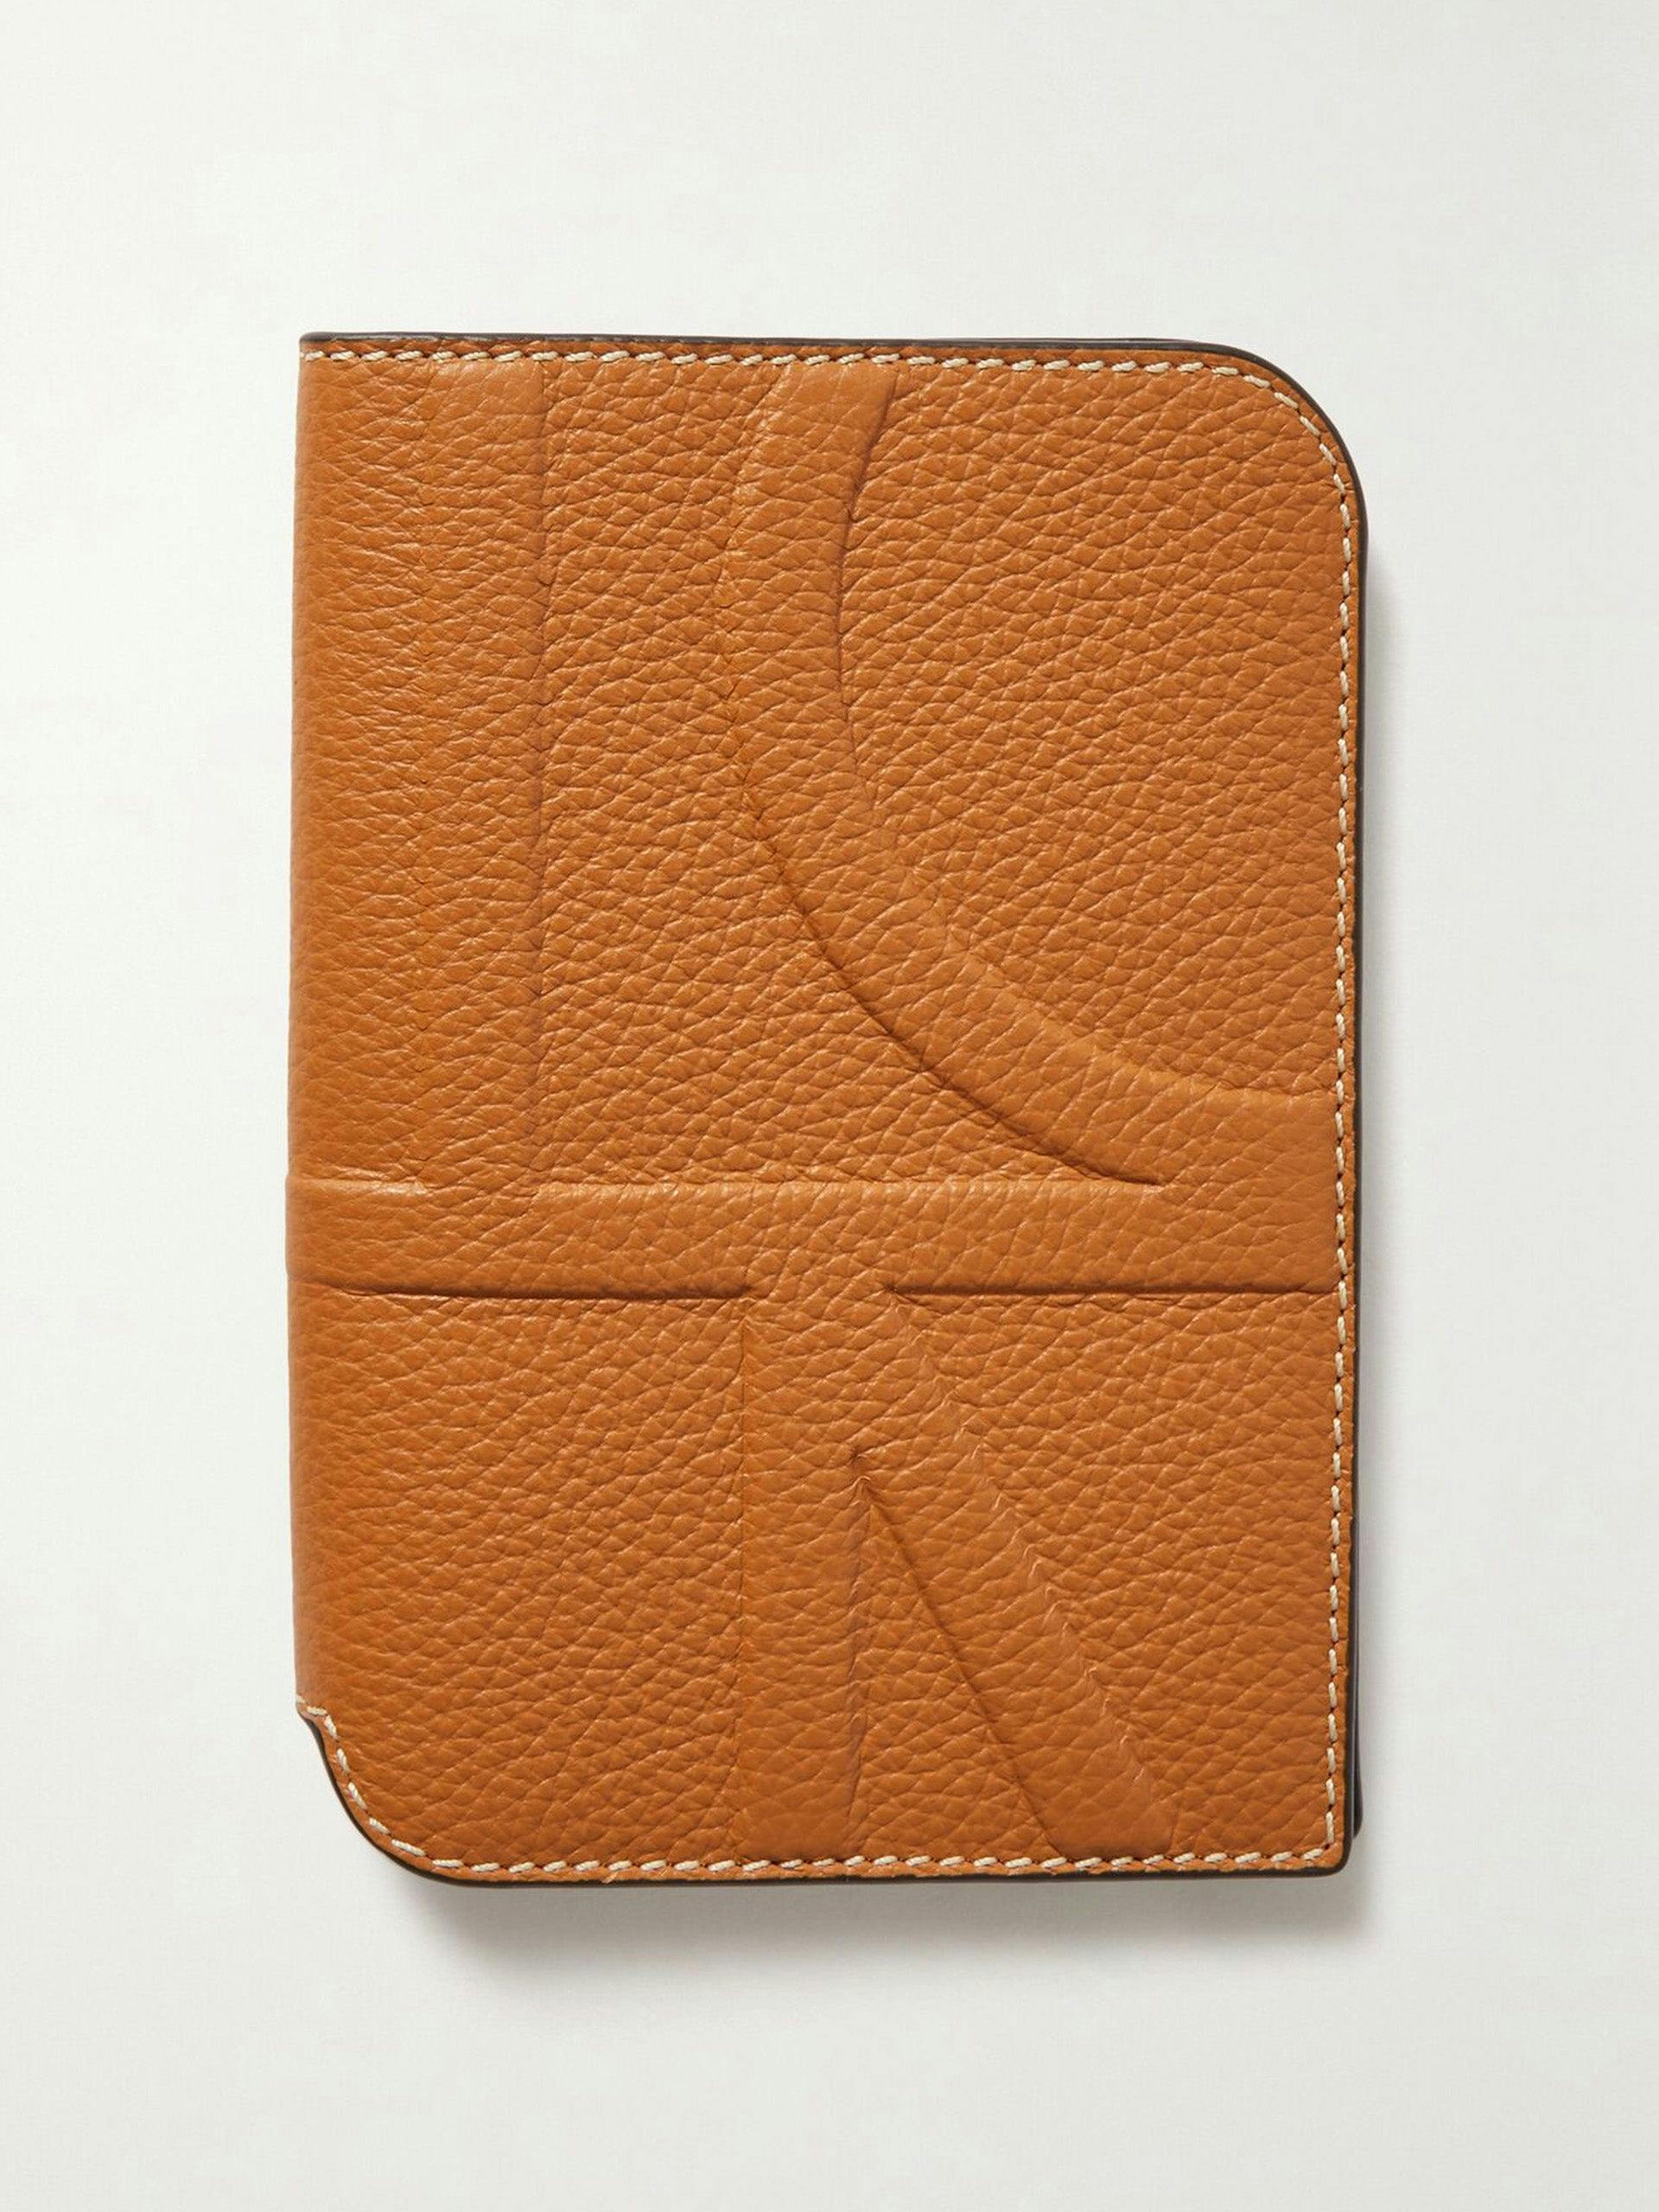 Embossed textured-leather passport cover